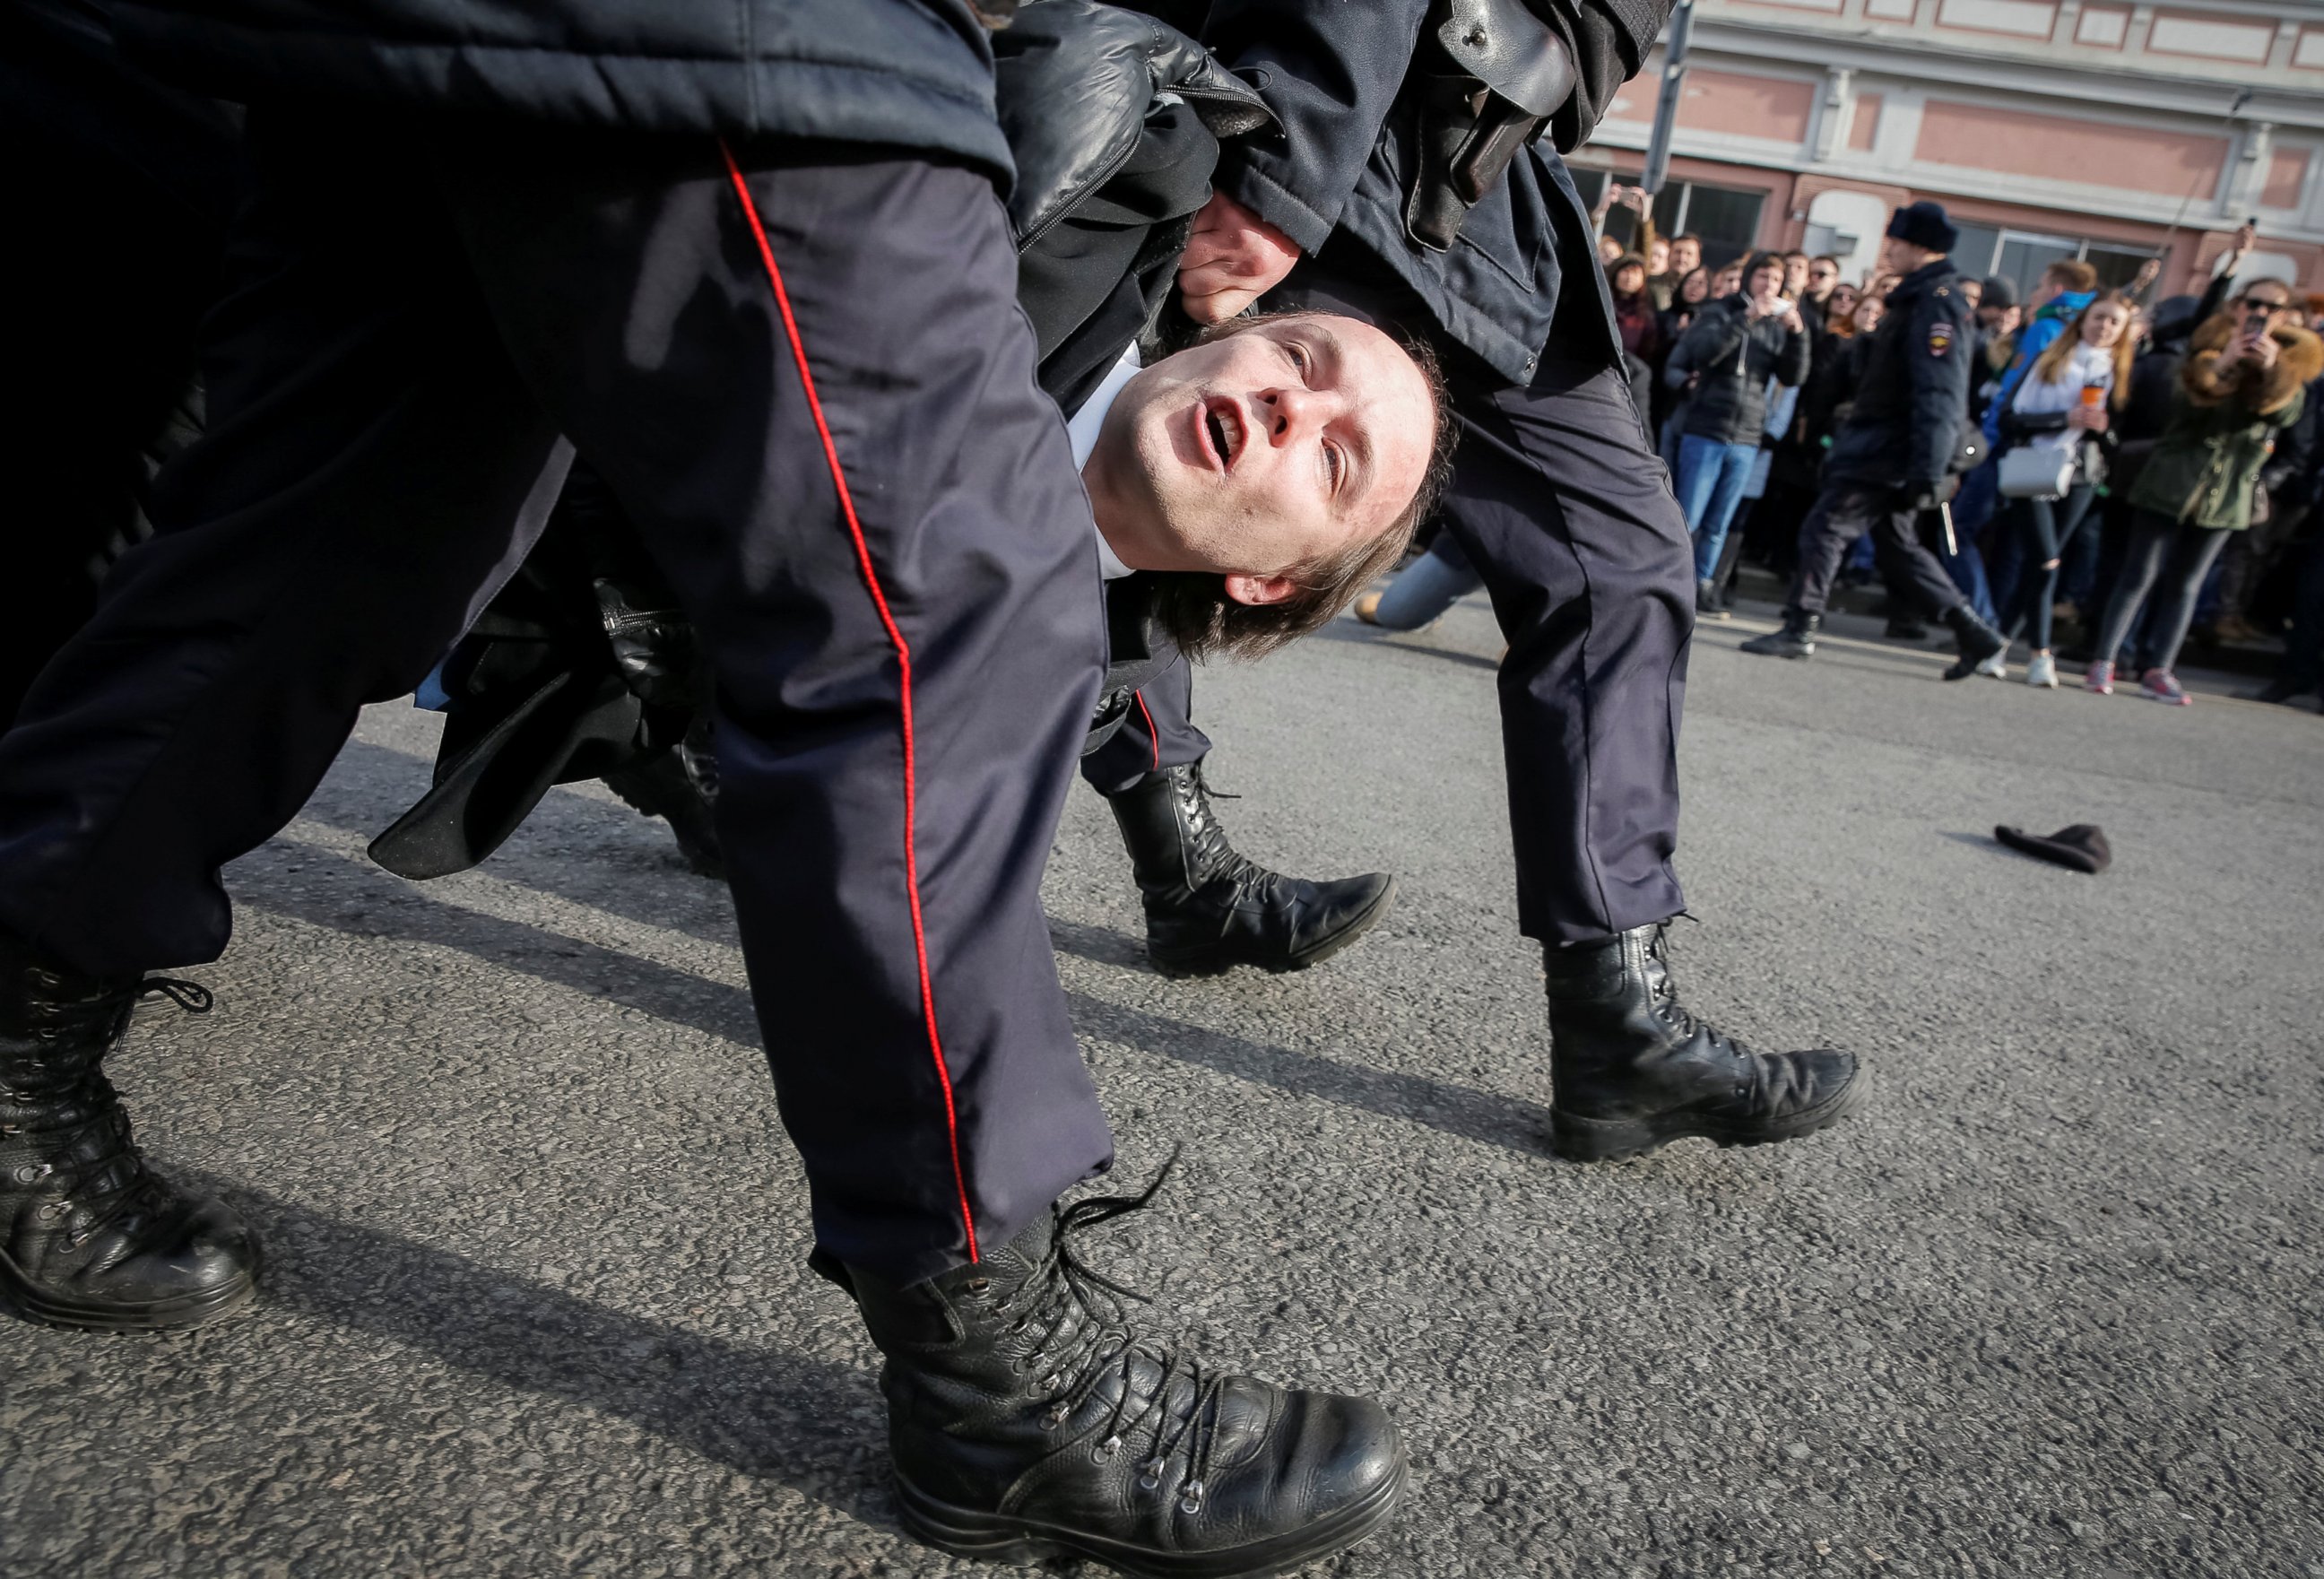 PHOTO: Law enforcement officers detain an opposition supporter during a rally in Moscow, Russia, March 26, 2017.